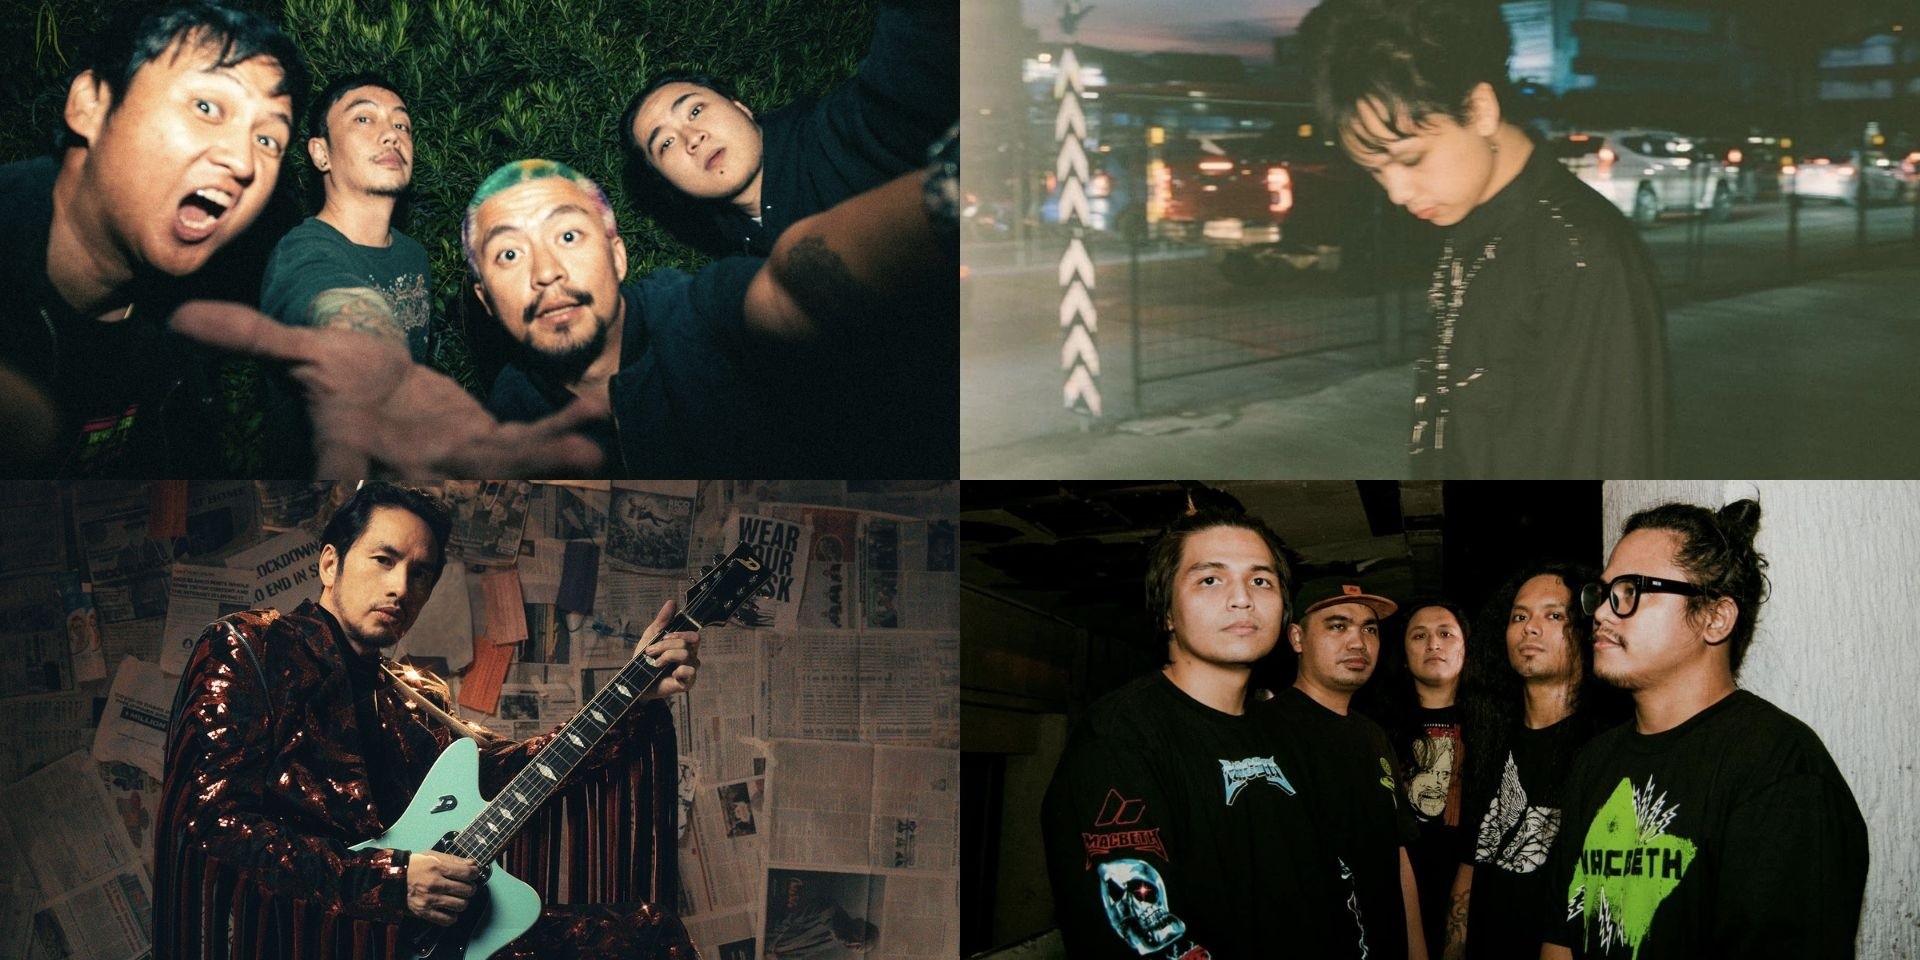 Here's how to get your NFT tickets for Chicosci's Summer Party featuring Rico Blanco, Zild, and Fragments